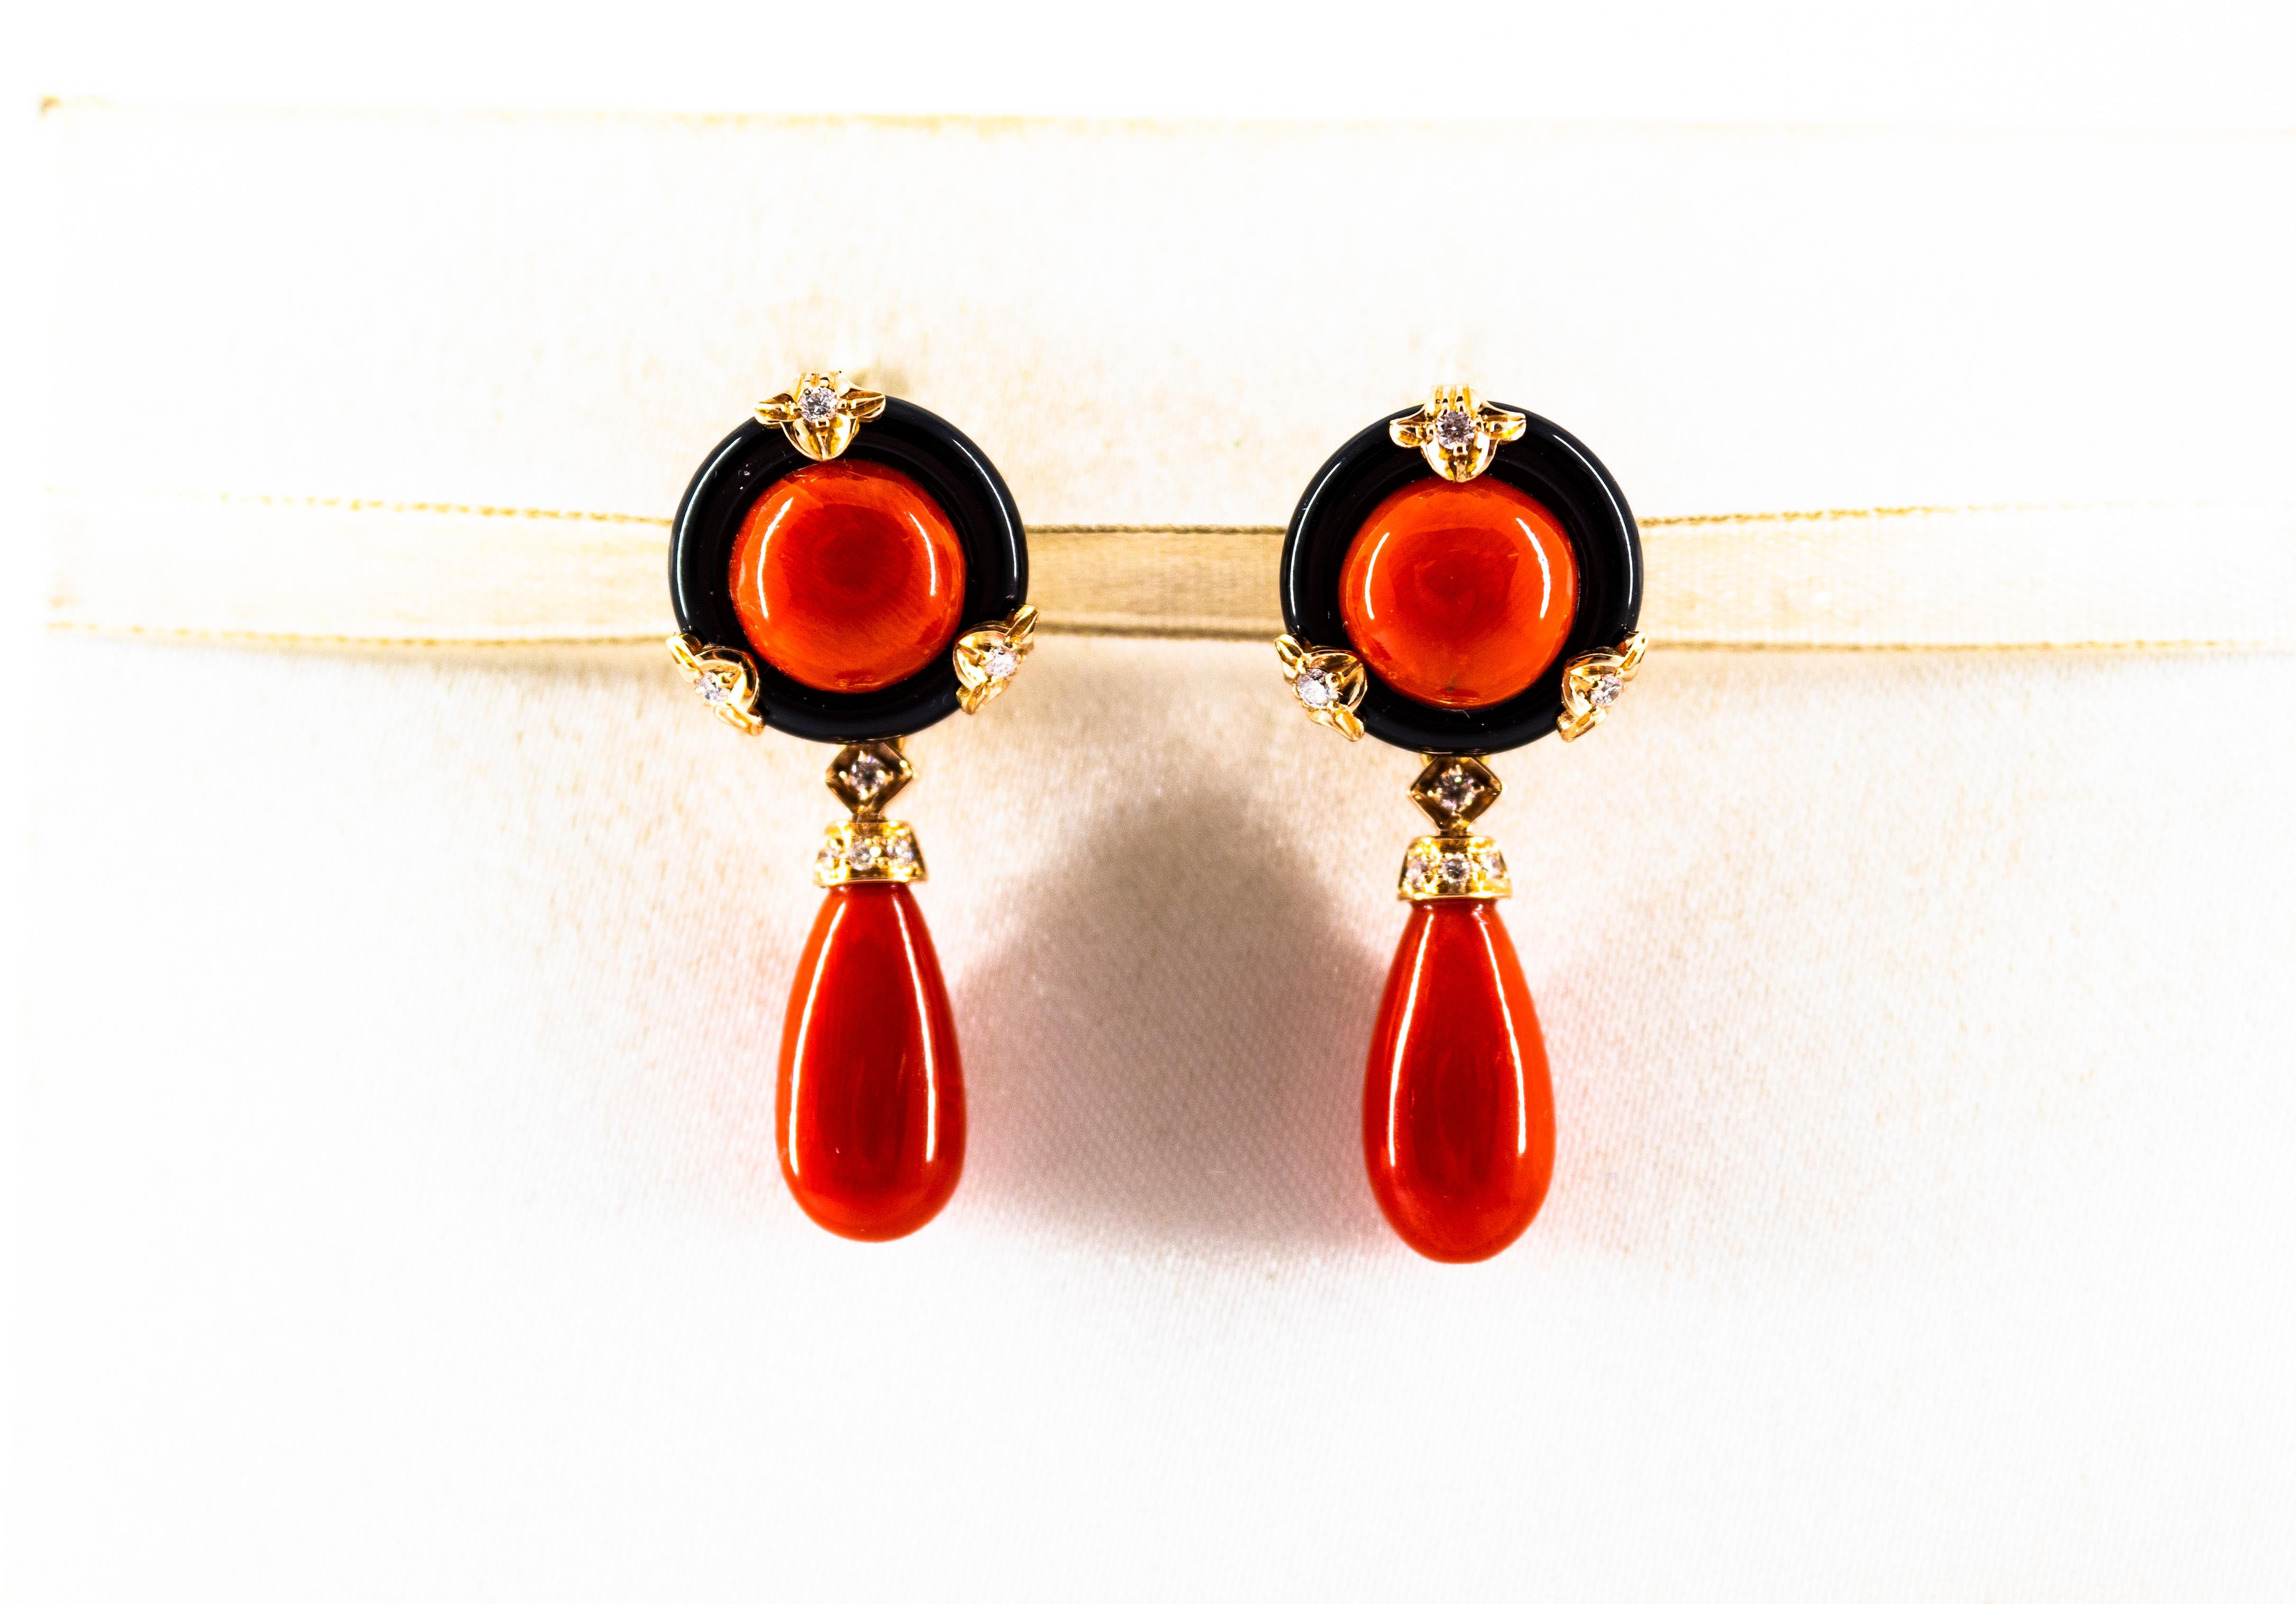 These Earrings are made of 18K Yellow Gold.
These Earrings have 0.24 Carats of White Modern Round Cut Diamonds.
These Earrings have Mediterranean (Sardinia, Italy) Red Coral and Onyx.
These Earrings are also available with Lever-Back Closures.
All